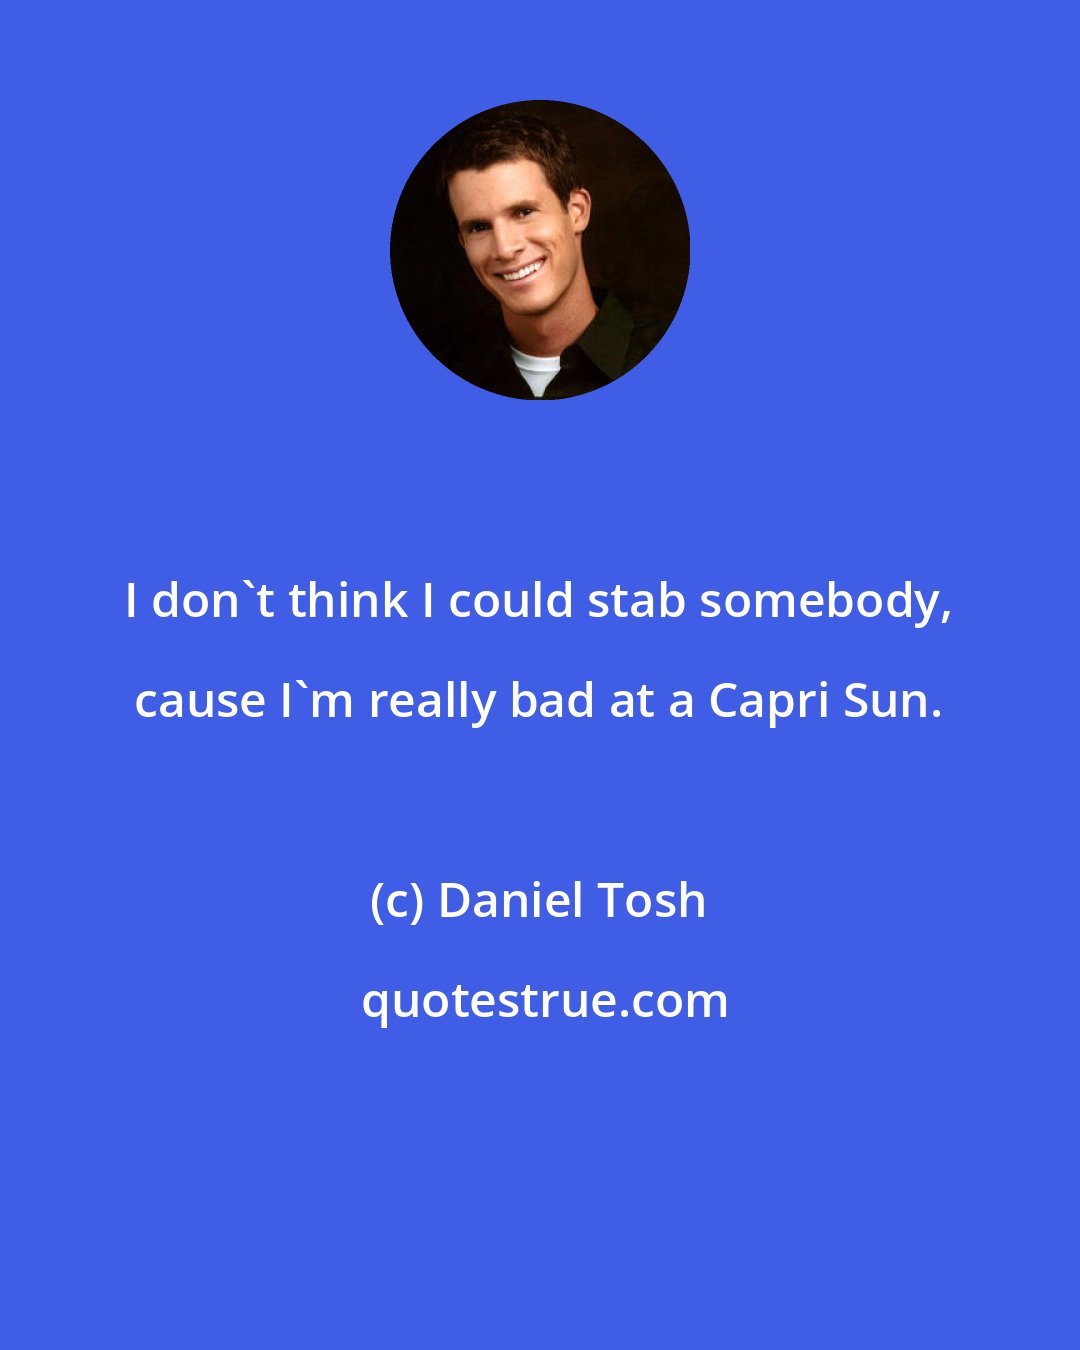 Daniel Tosh: I don't think I could stab somebody, cause I'm really bad at a Capri Sun.